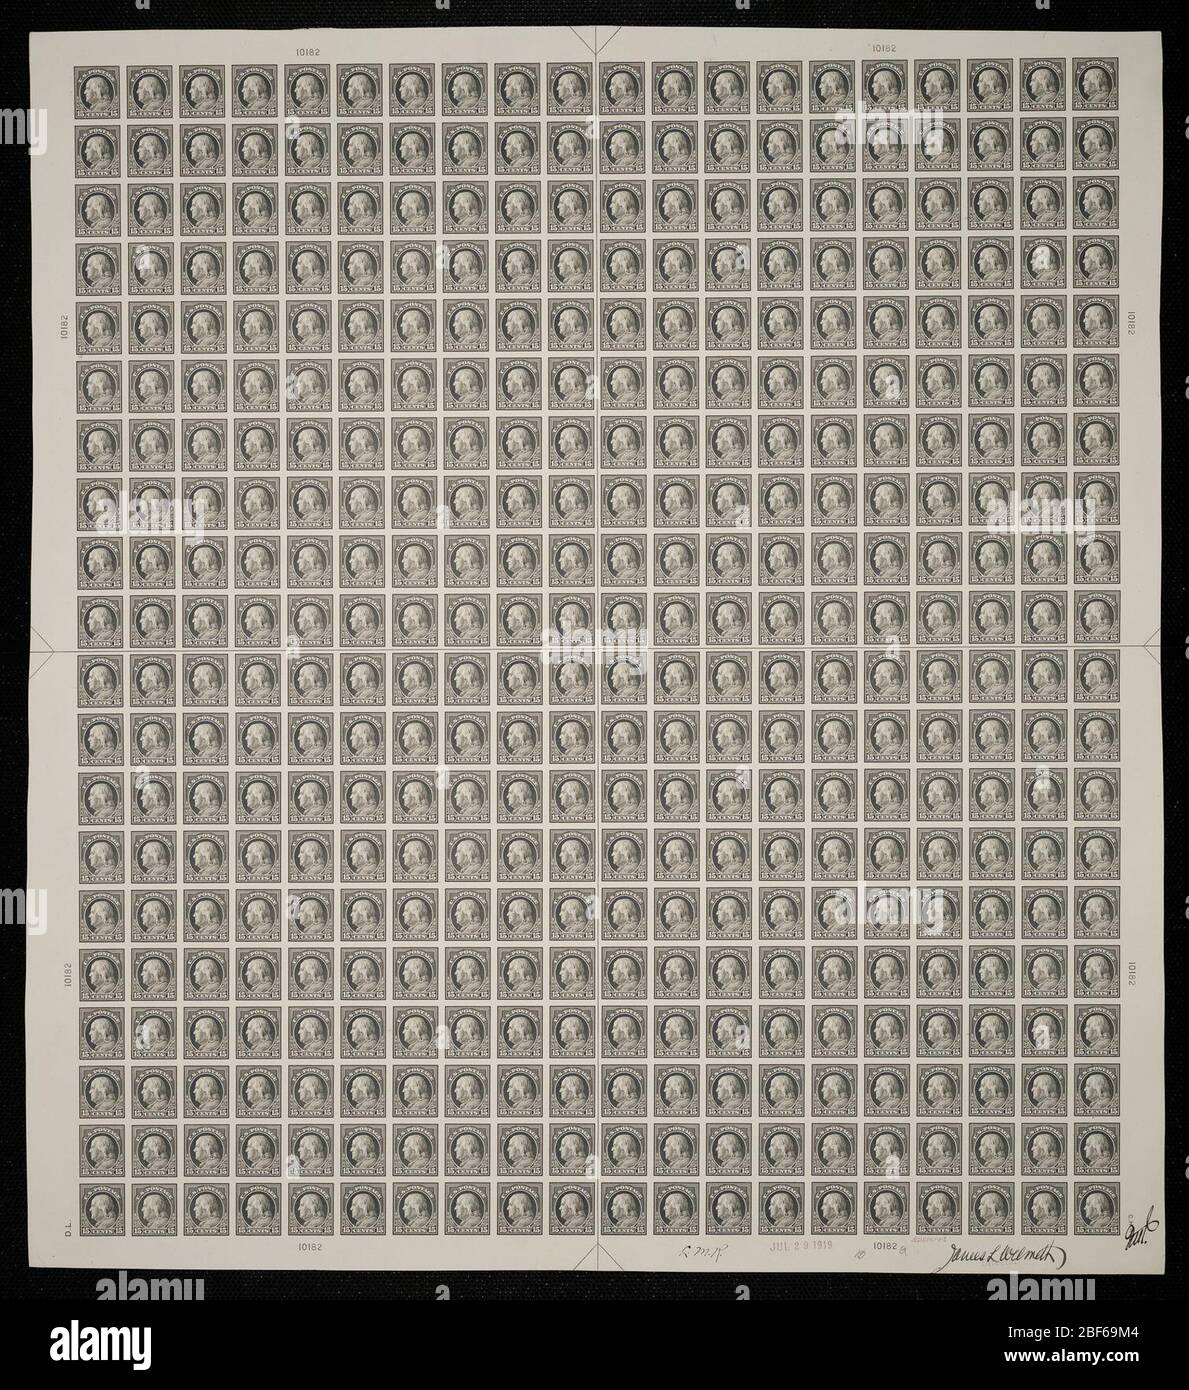 15c Franklin plate proof. Certified plate proofs are the last printed proof of the plate before printing the stamps at the Bureau of Engraving and Printing. These plate proofs are each unique, with the approval signatures and date. Stock Photo